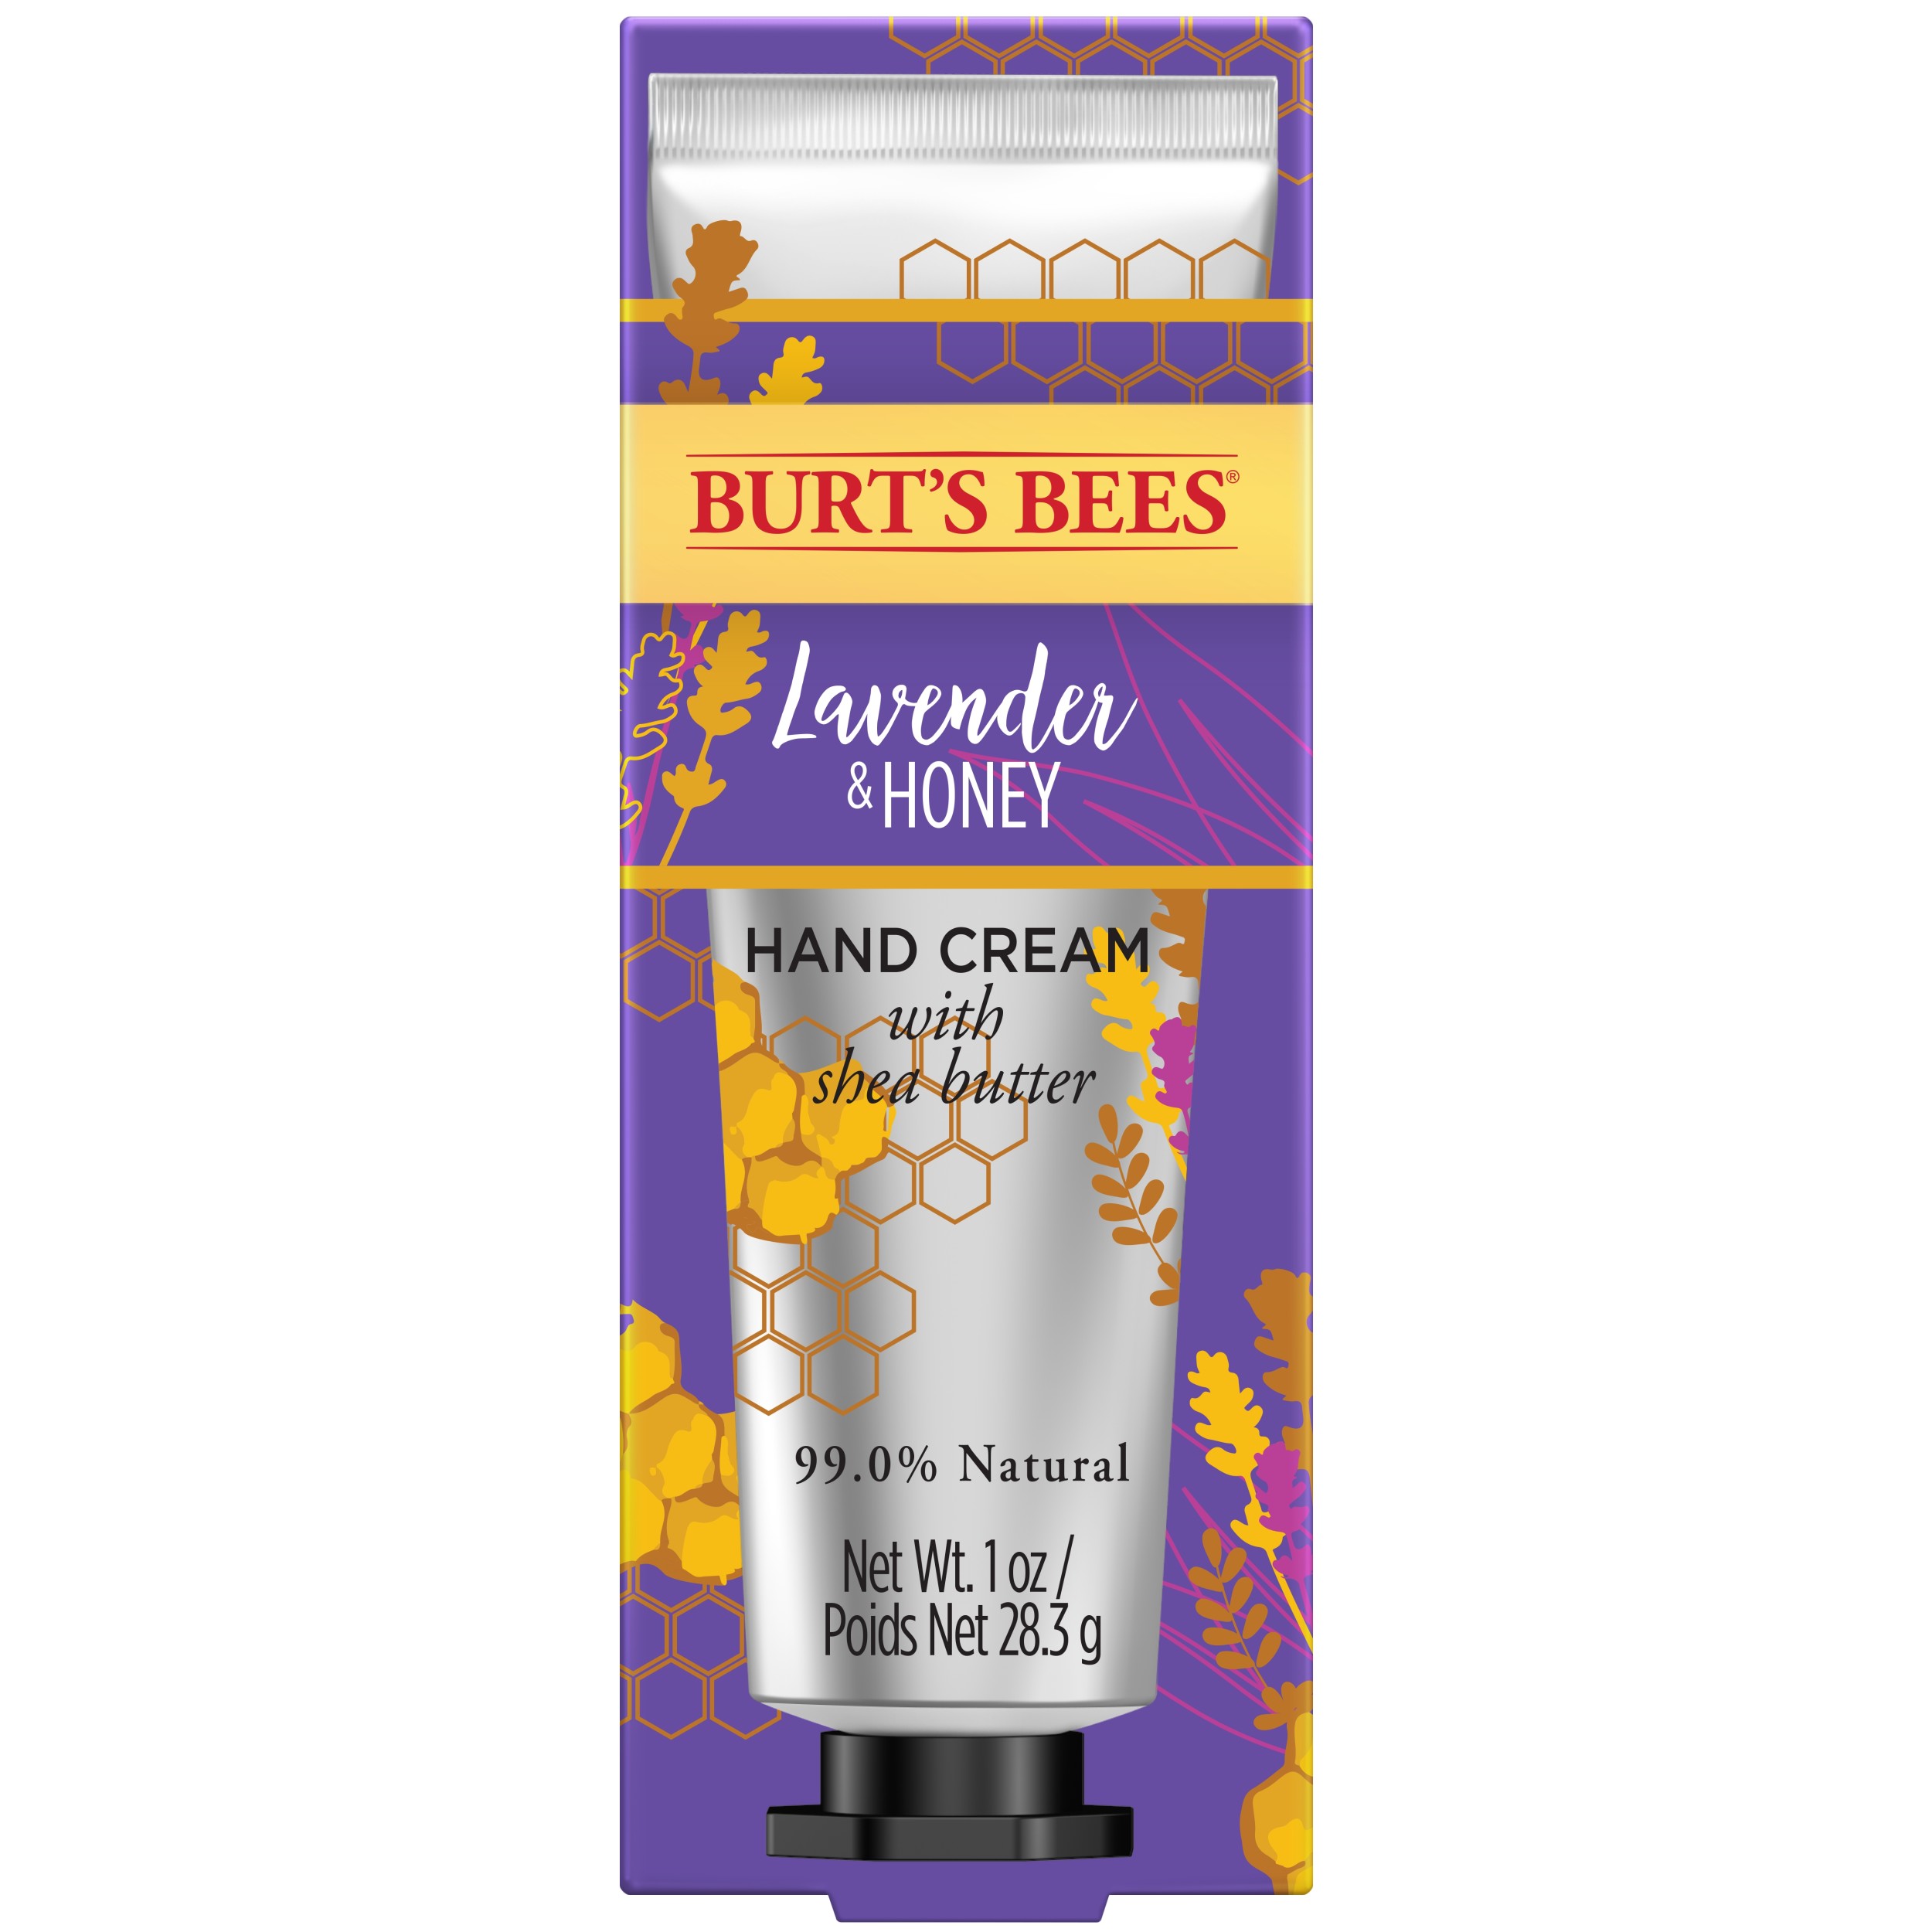 Burts Bees Lavender and Honey Hand Cream with Shea Butter, 1 Ounce - image 2 of 10